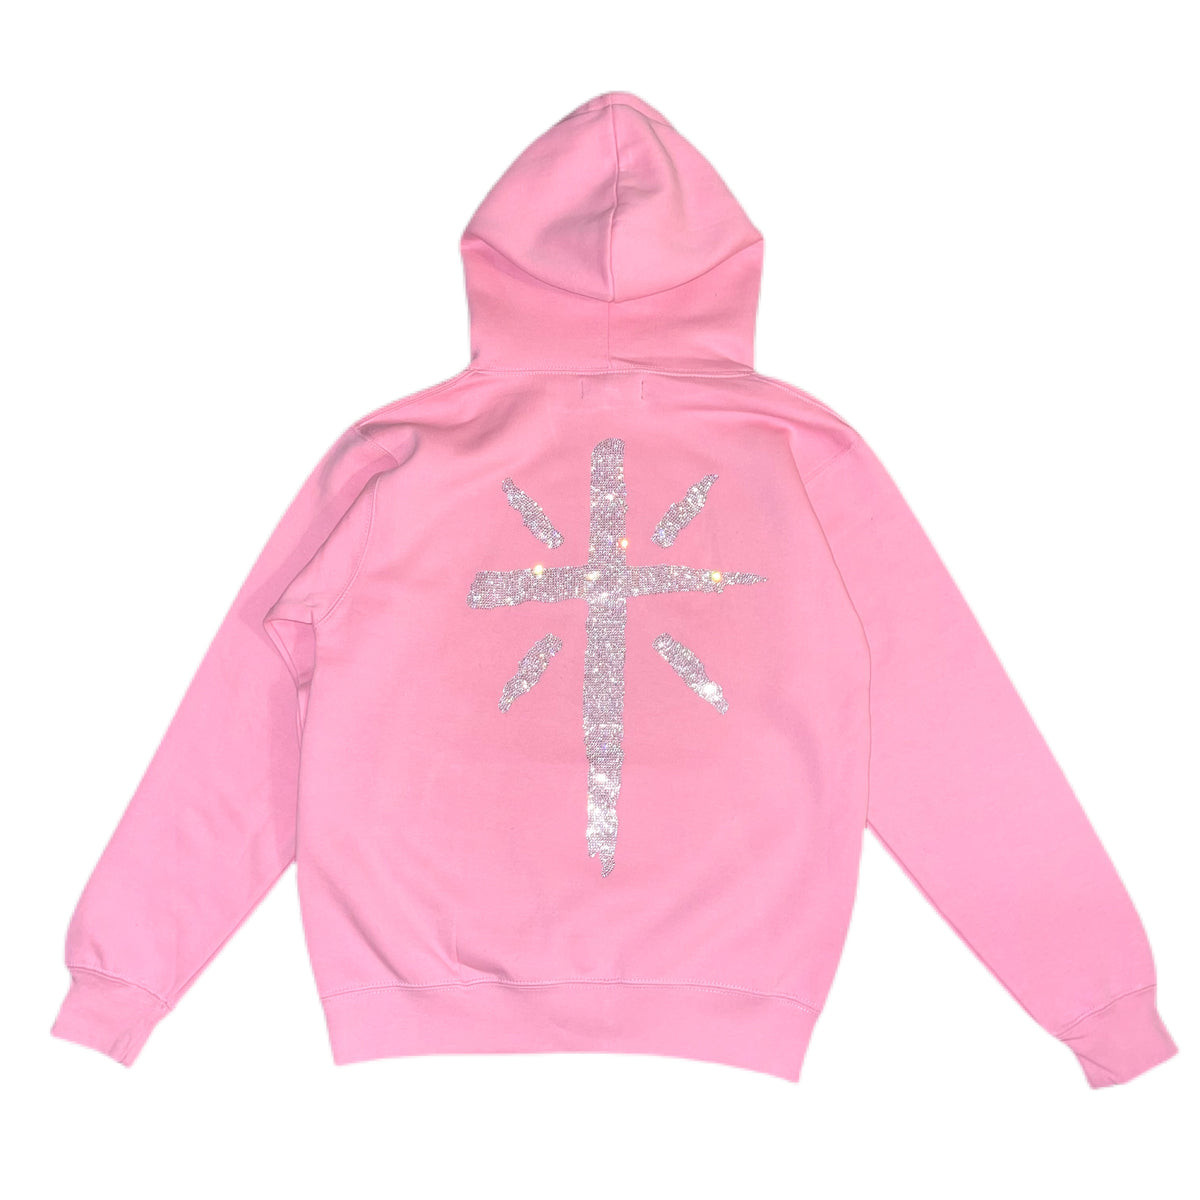 True Religion EMBRO DIRECT HOODY - Hoodie - old rose/pink